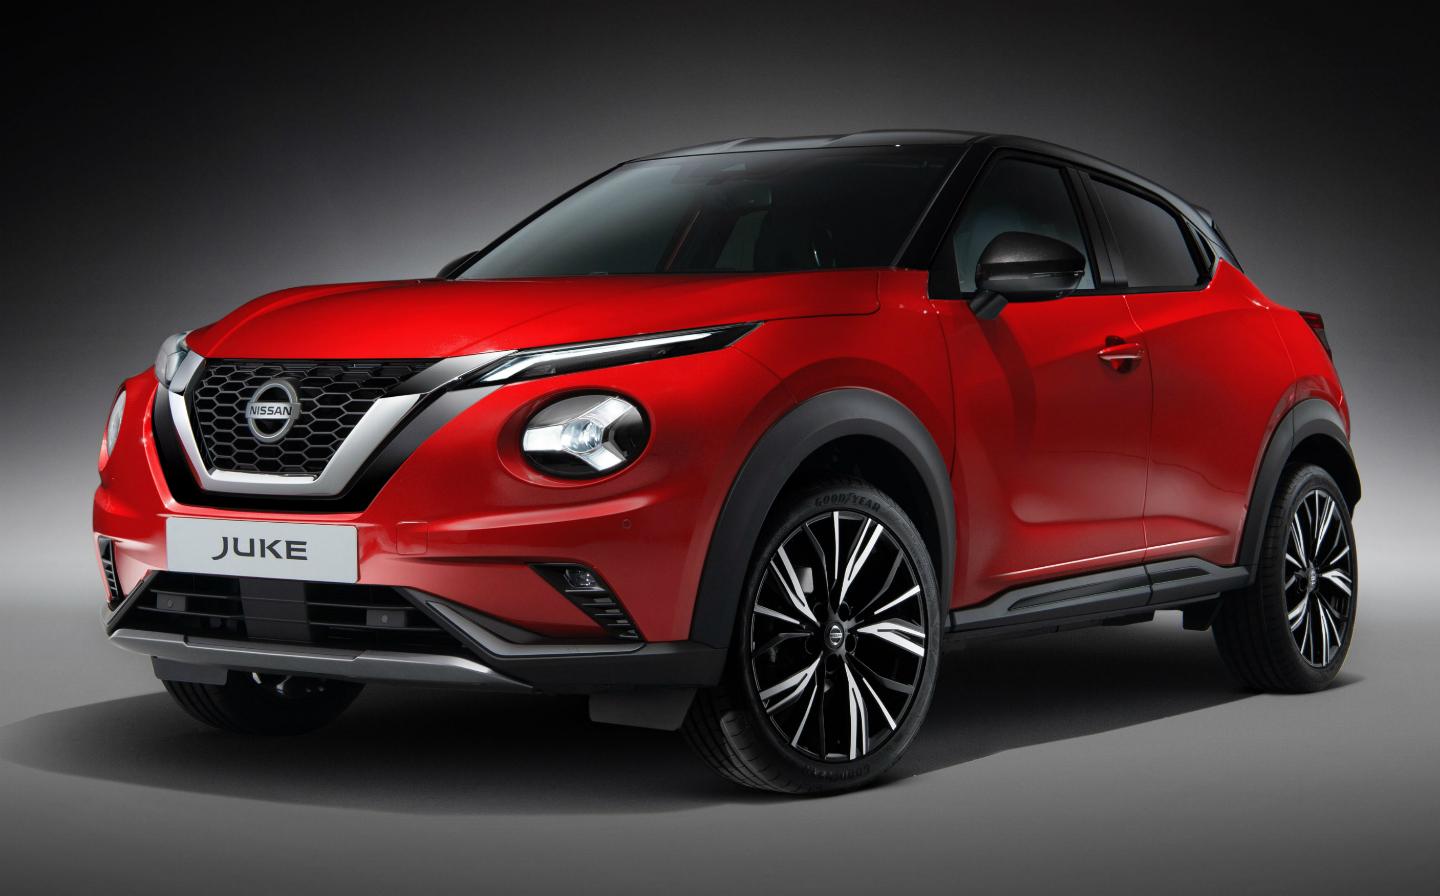 Nissan Juke Photos Prices Engines Technology And On Sale Date